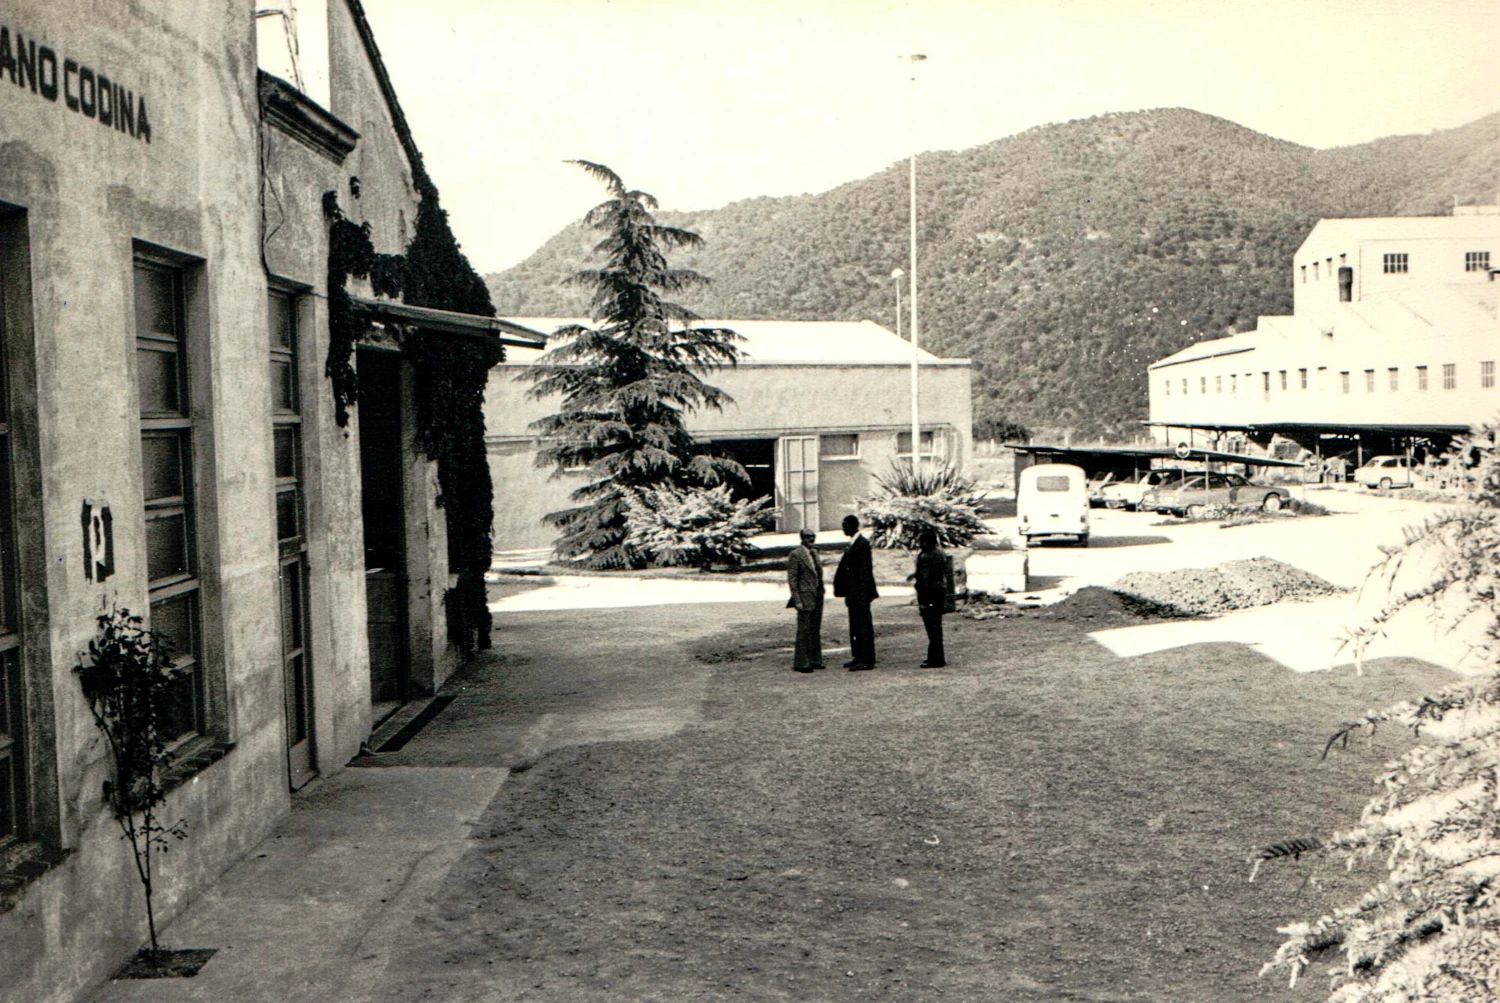 New factory building in 1943